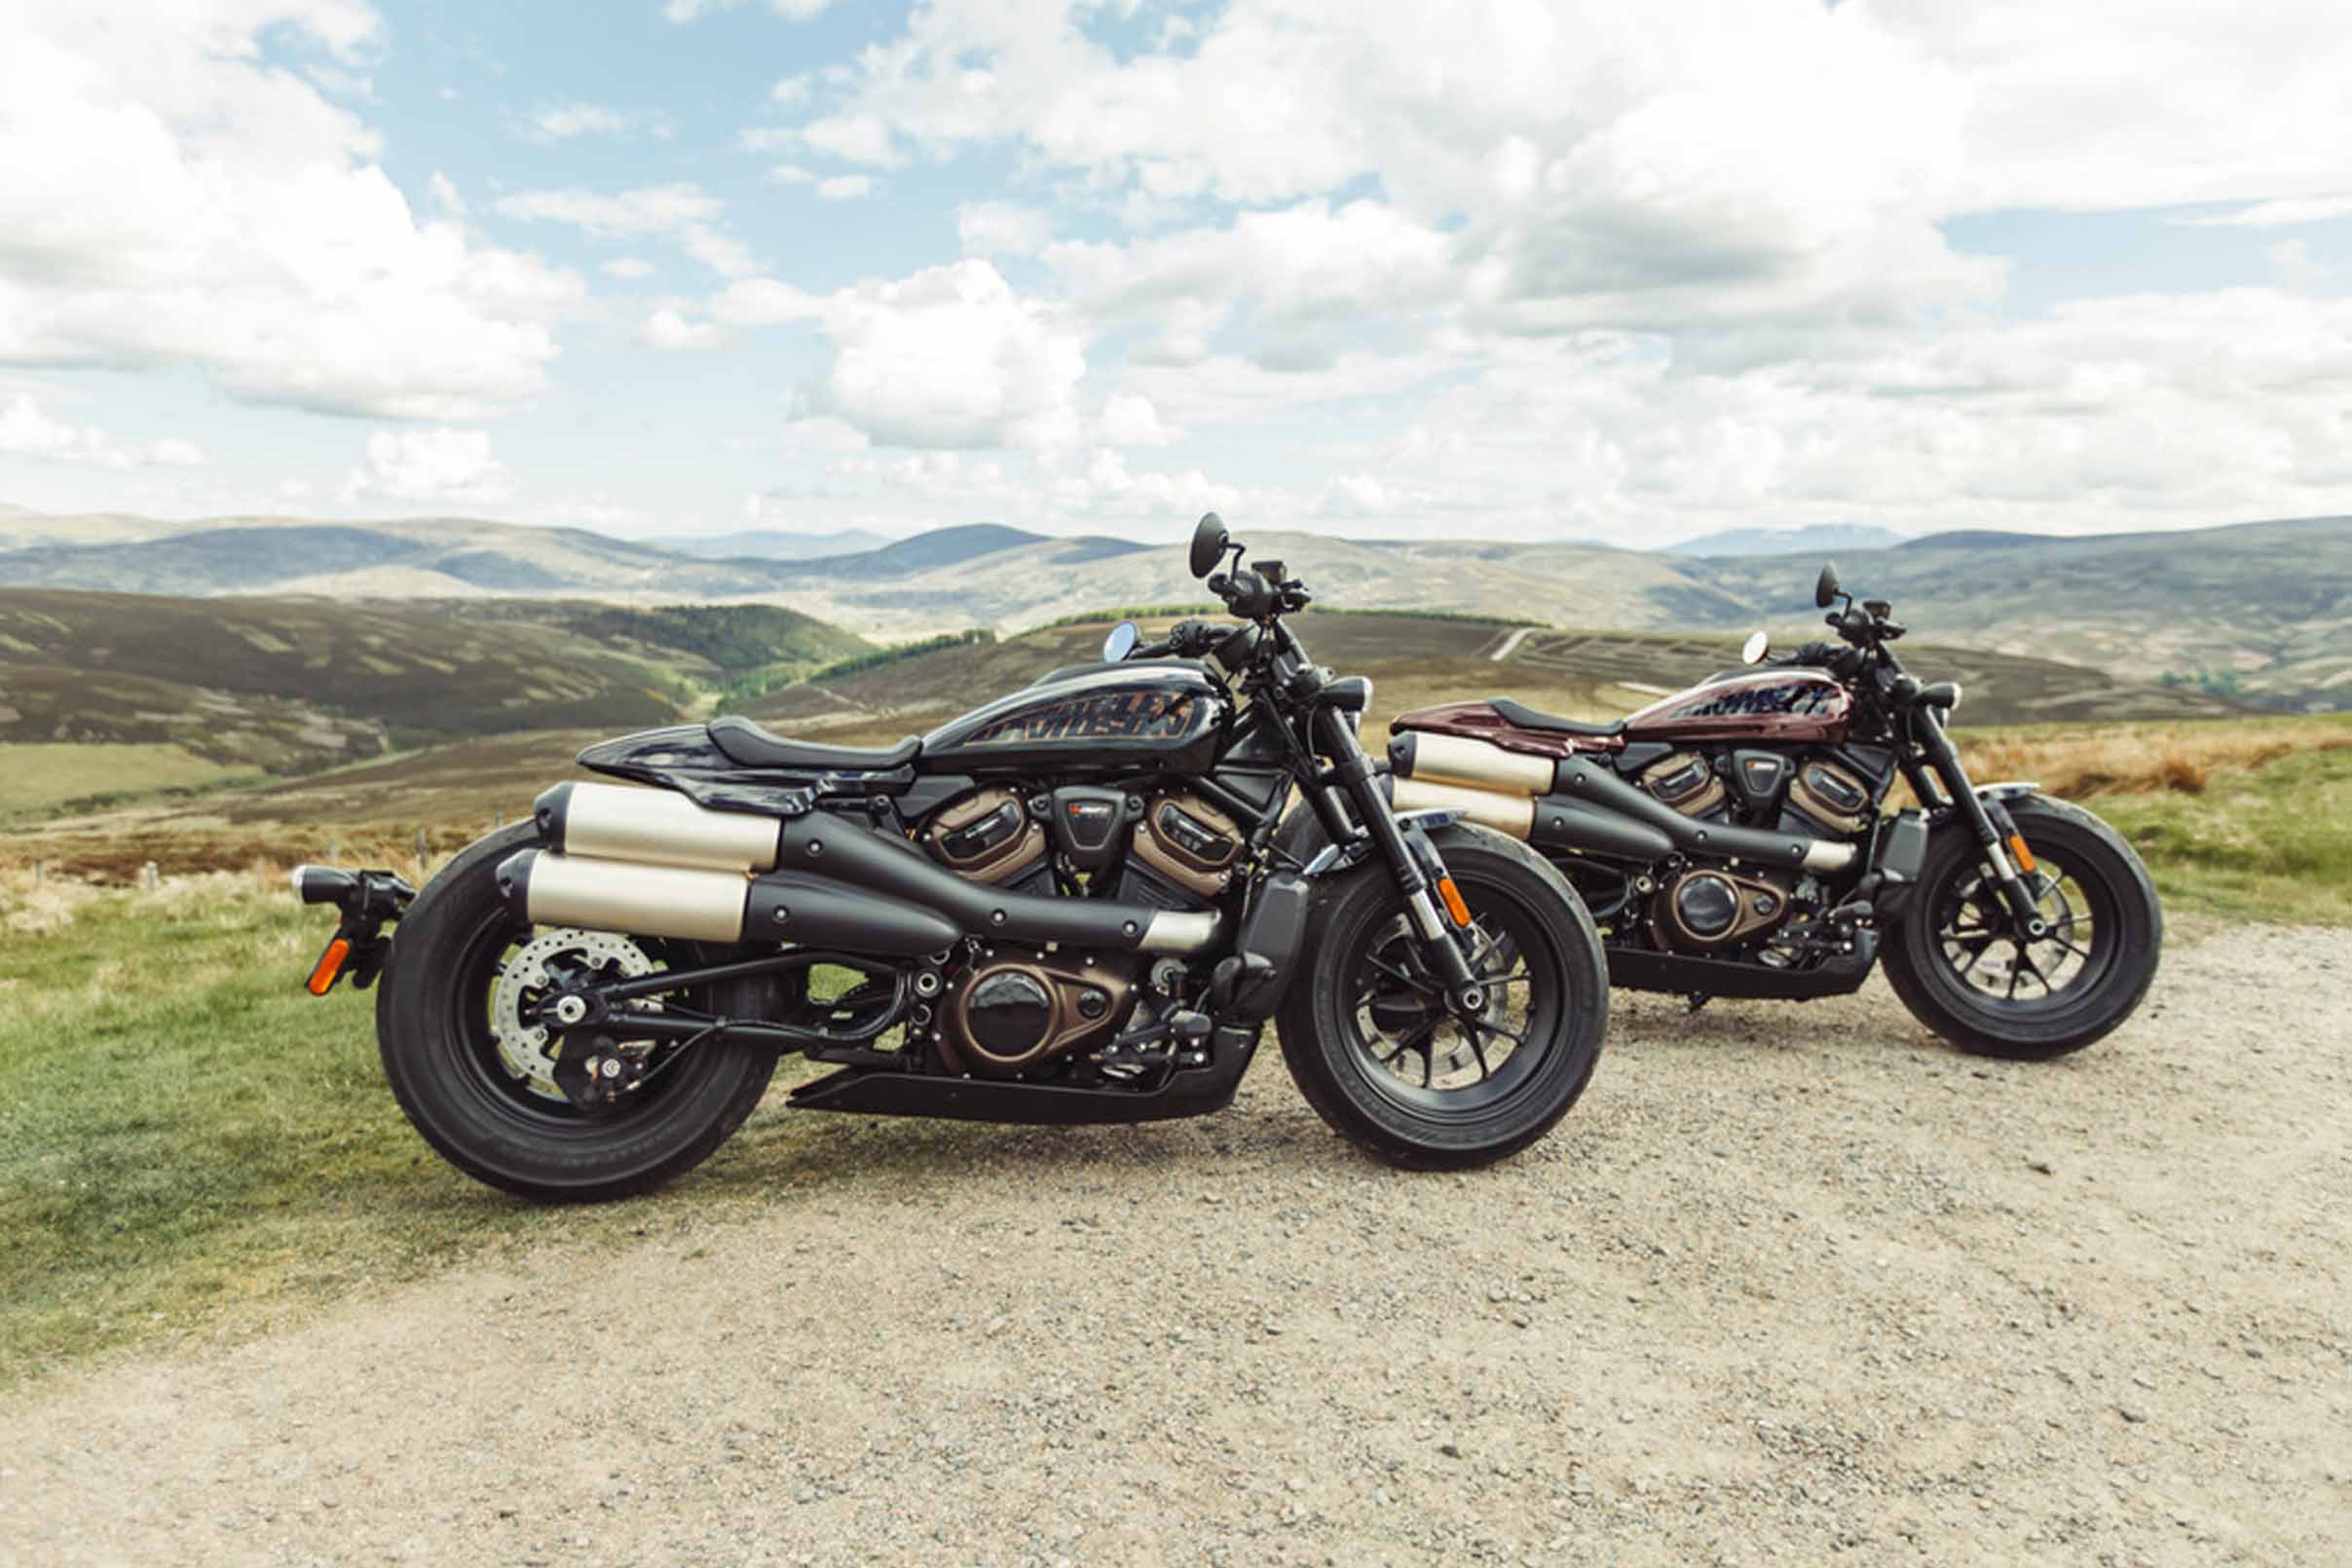 Get ready for the 2021 Harley-Davidson Sportster S, check details